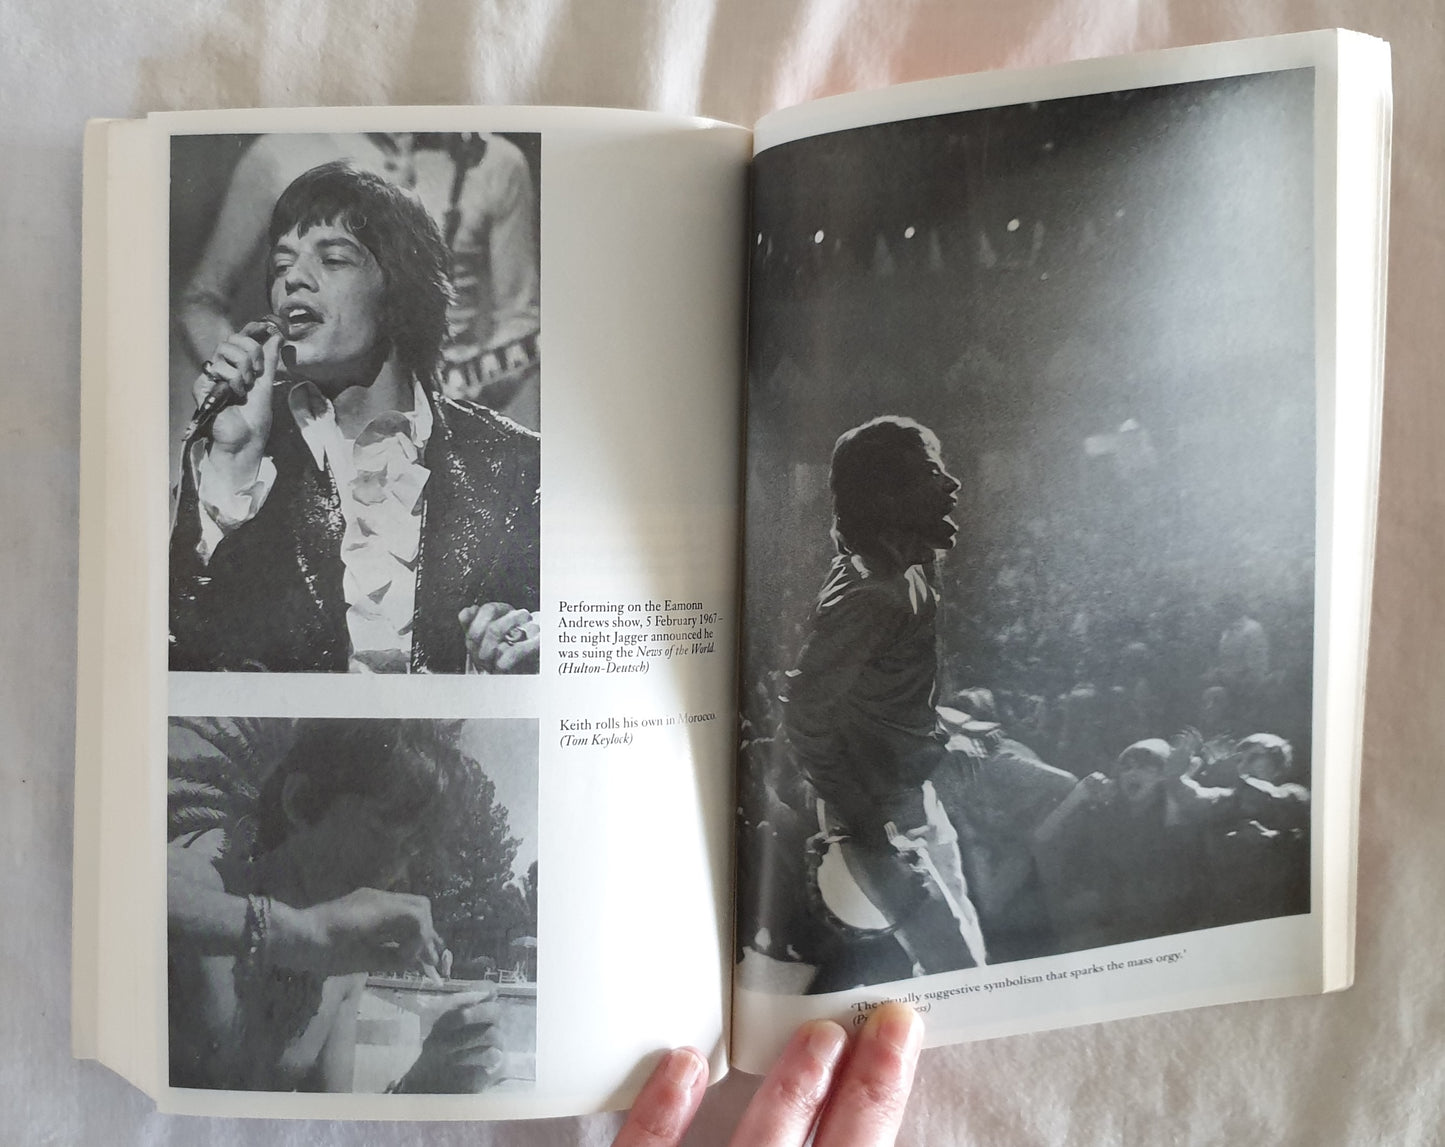 Mick Jagger by Christopher Sandford